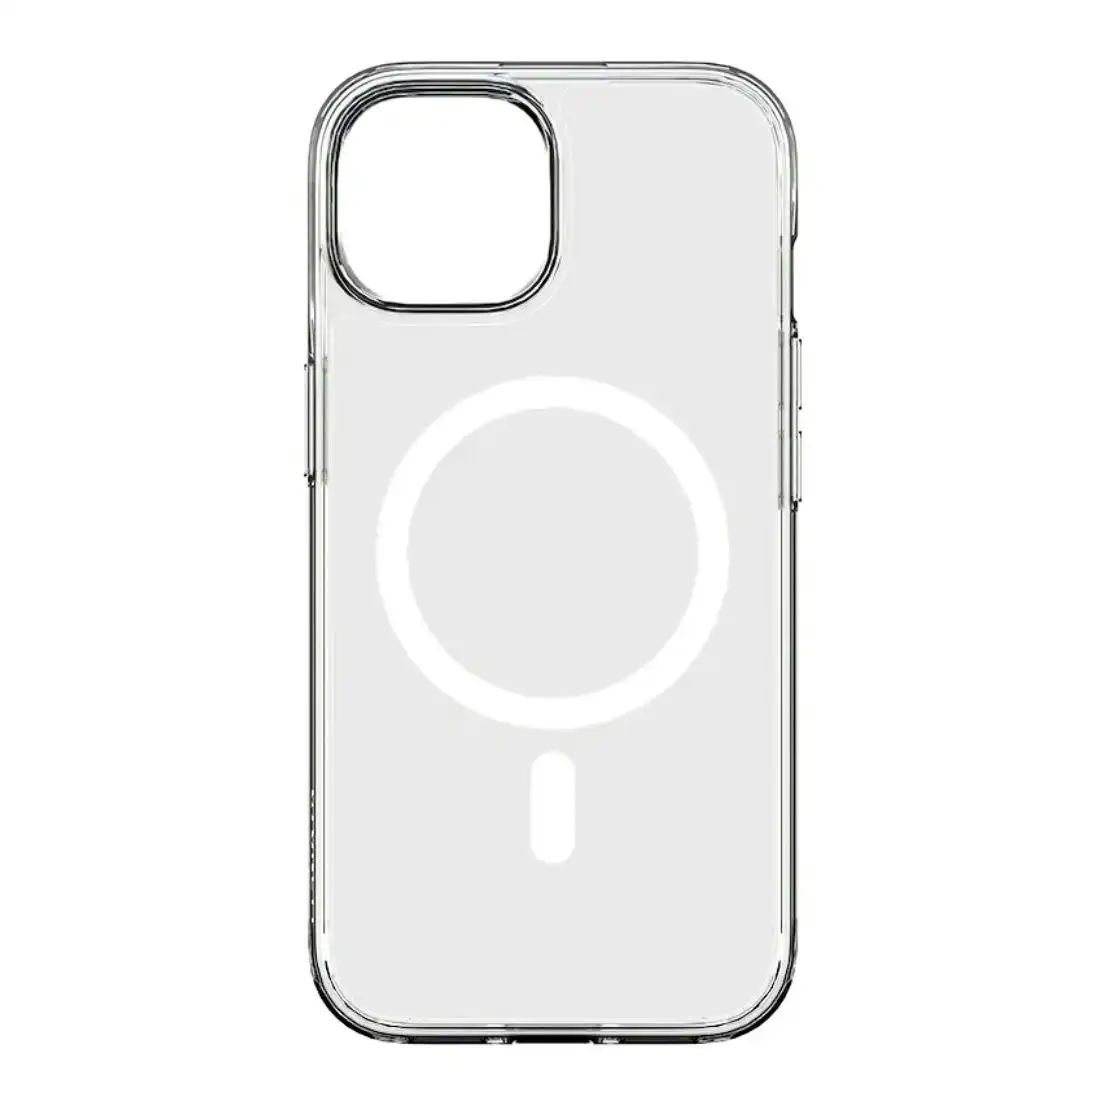 Cygnett AeroMag Magnetic Case for iPhone 15 CY4578CPAEG - Clear